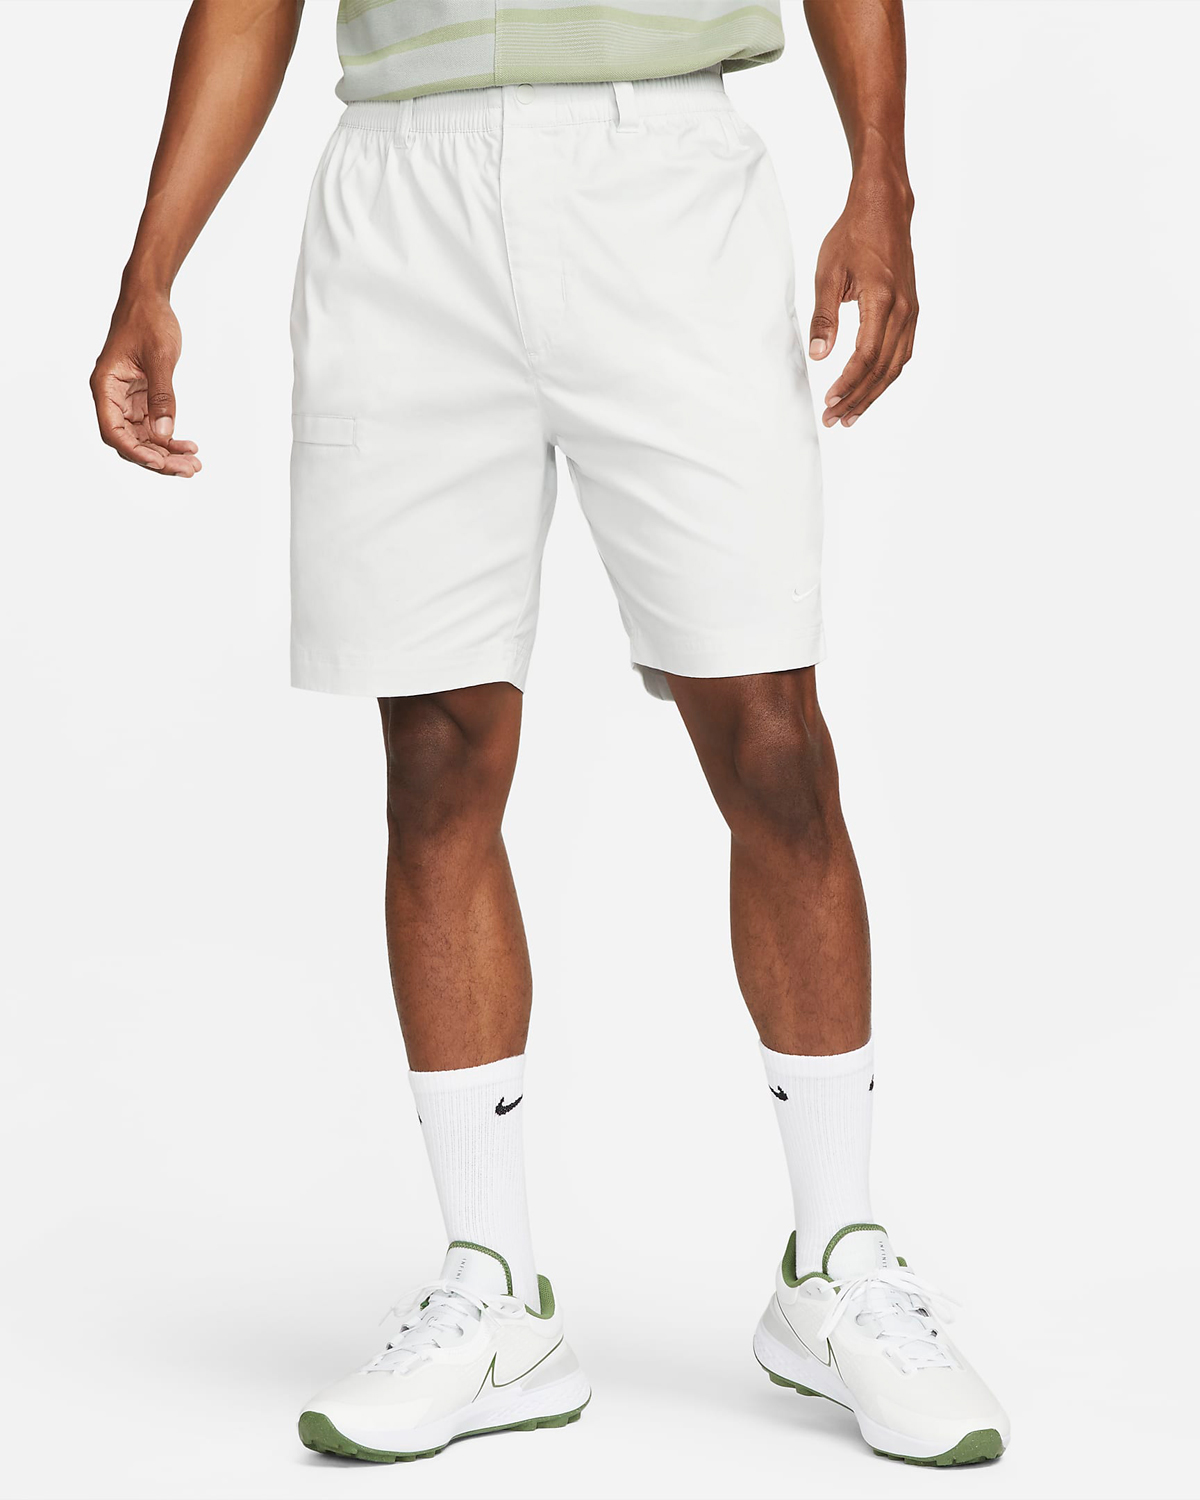 Nike-Unscripted-Golf-Shorts-White-1